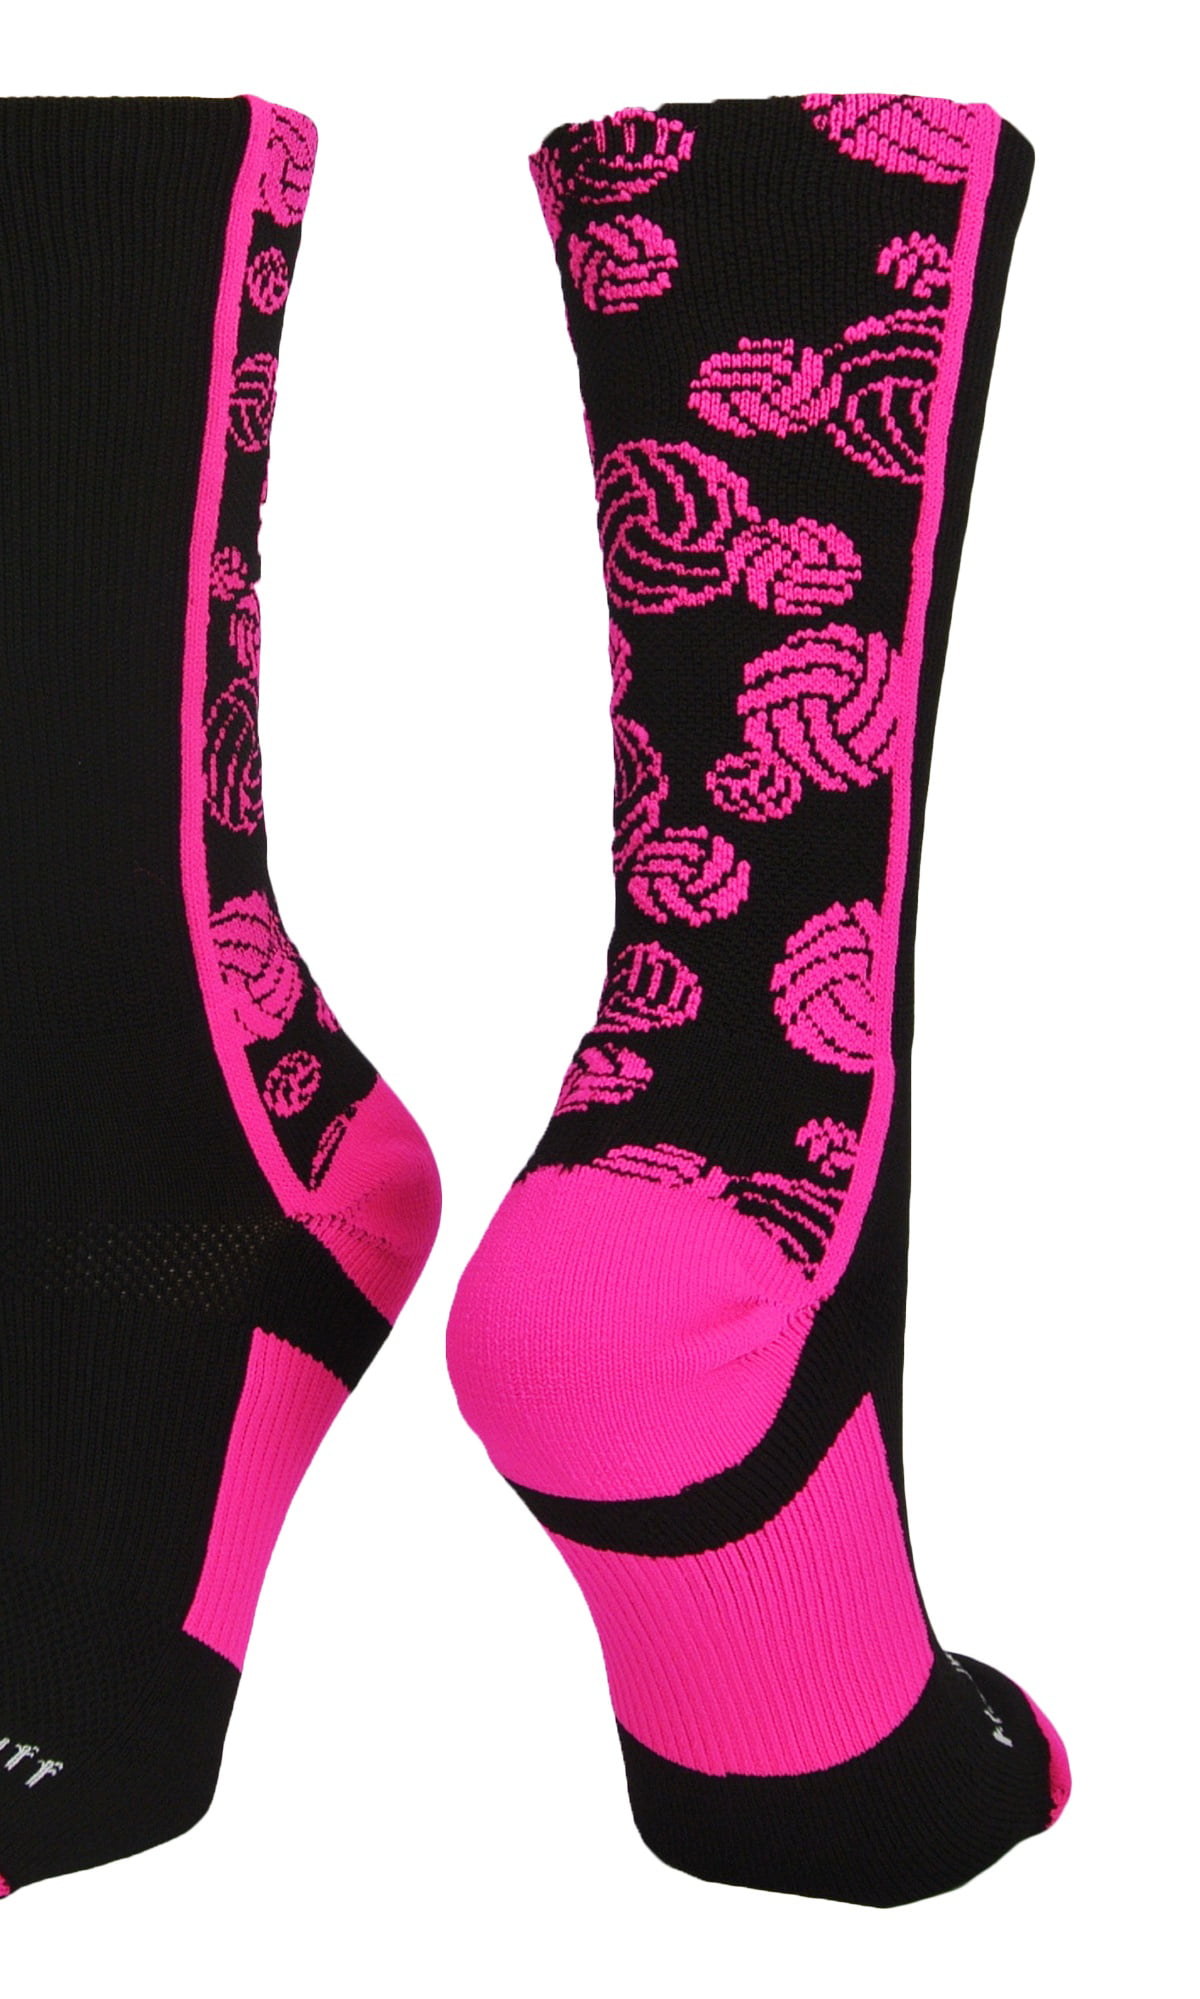 MadSportsStuff Donut Socks with Pink Frosting and Sprinkles